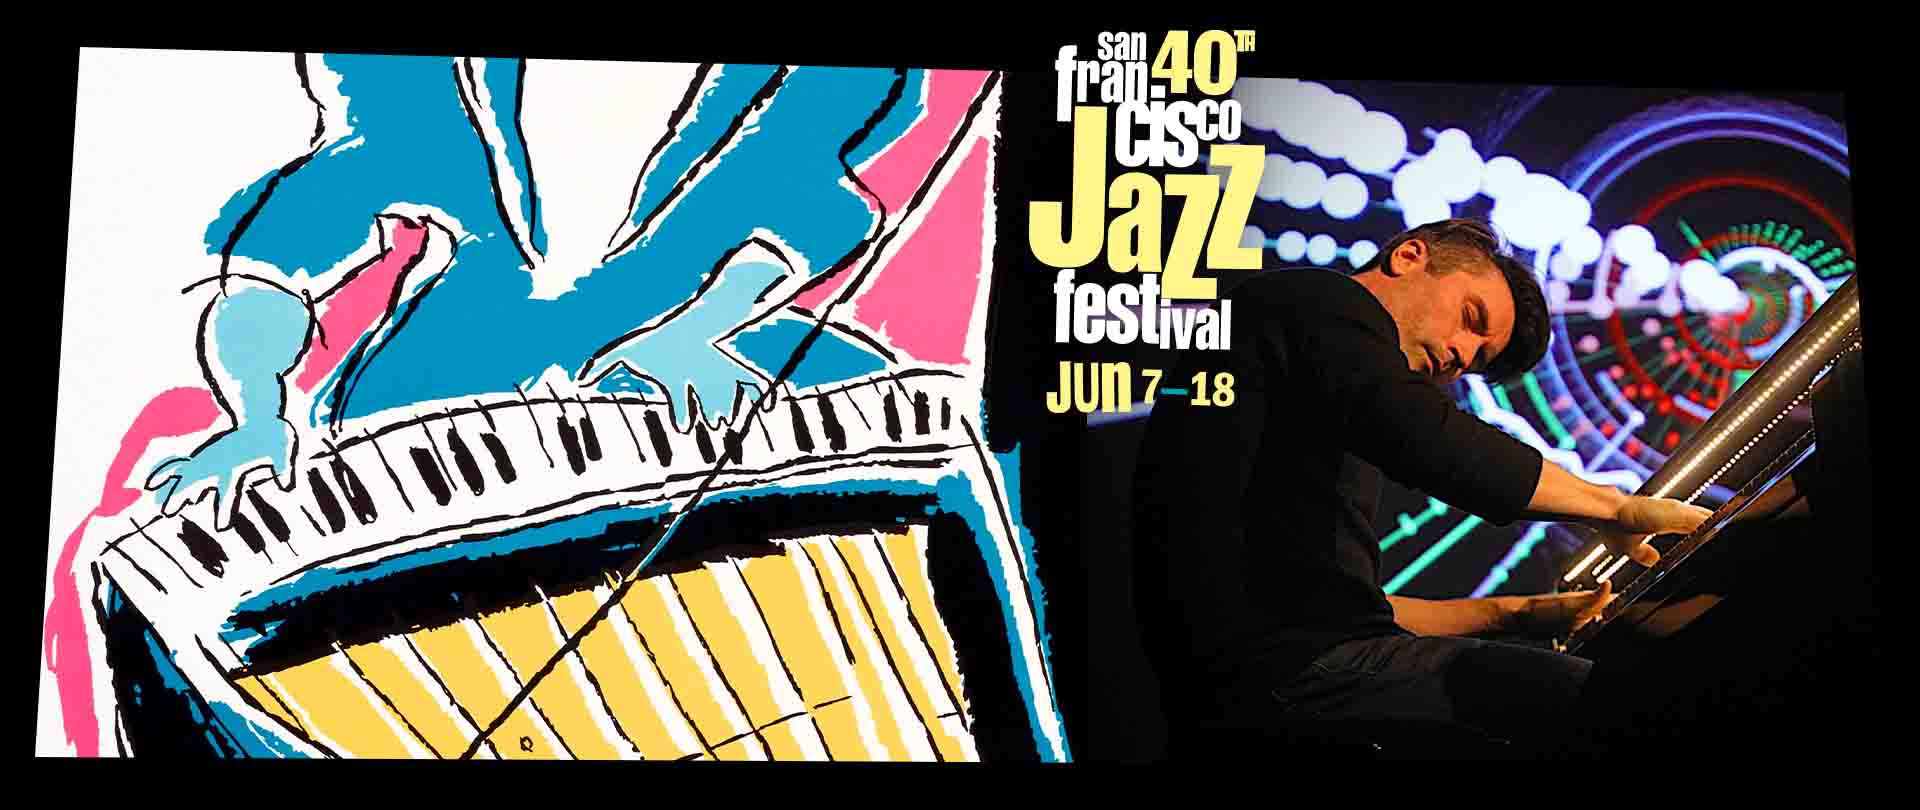 A photo of Dan Tepfer with the 40th San Francisco Jazz Festival logo